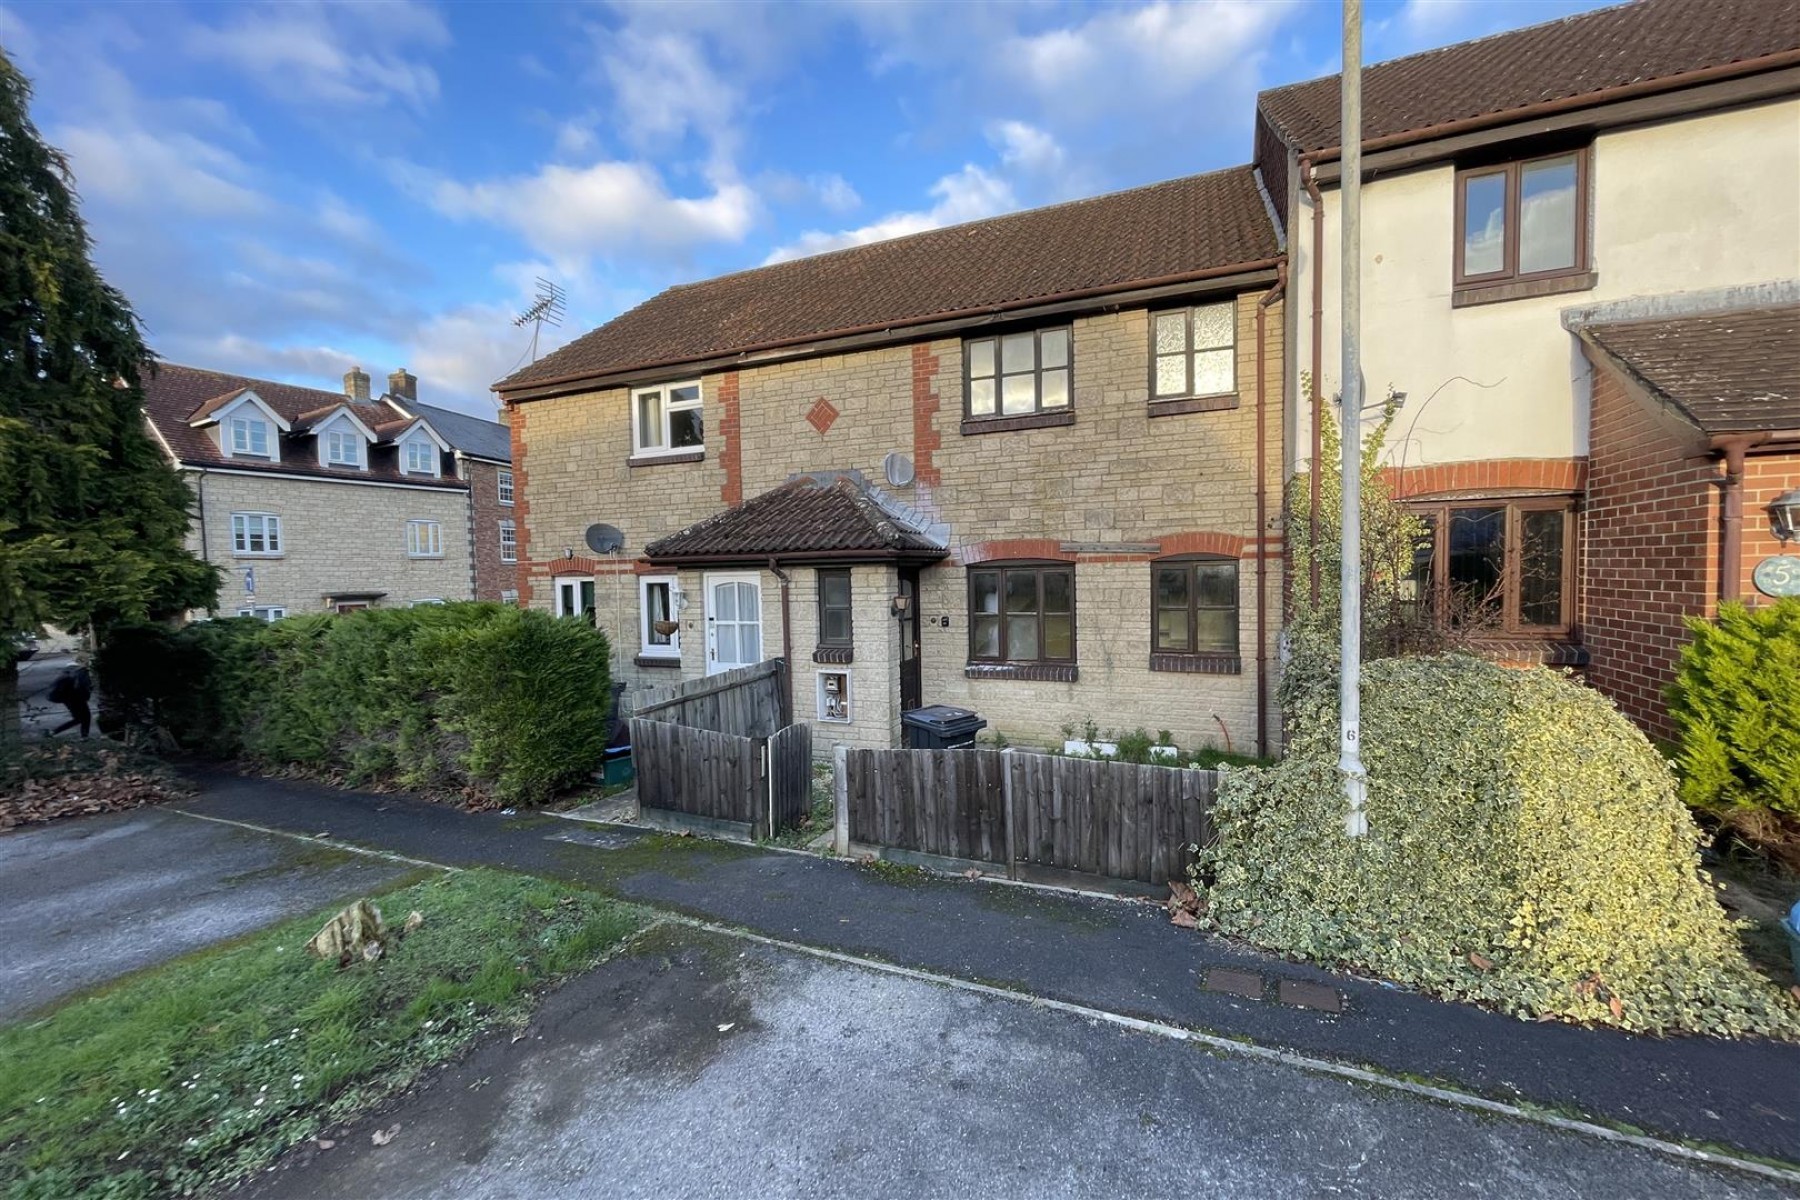 Images for 1 BED HOUSE| 2 x PARKING | WINCANTON